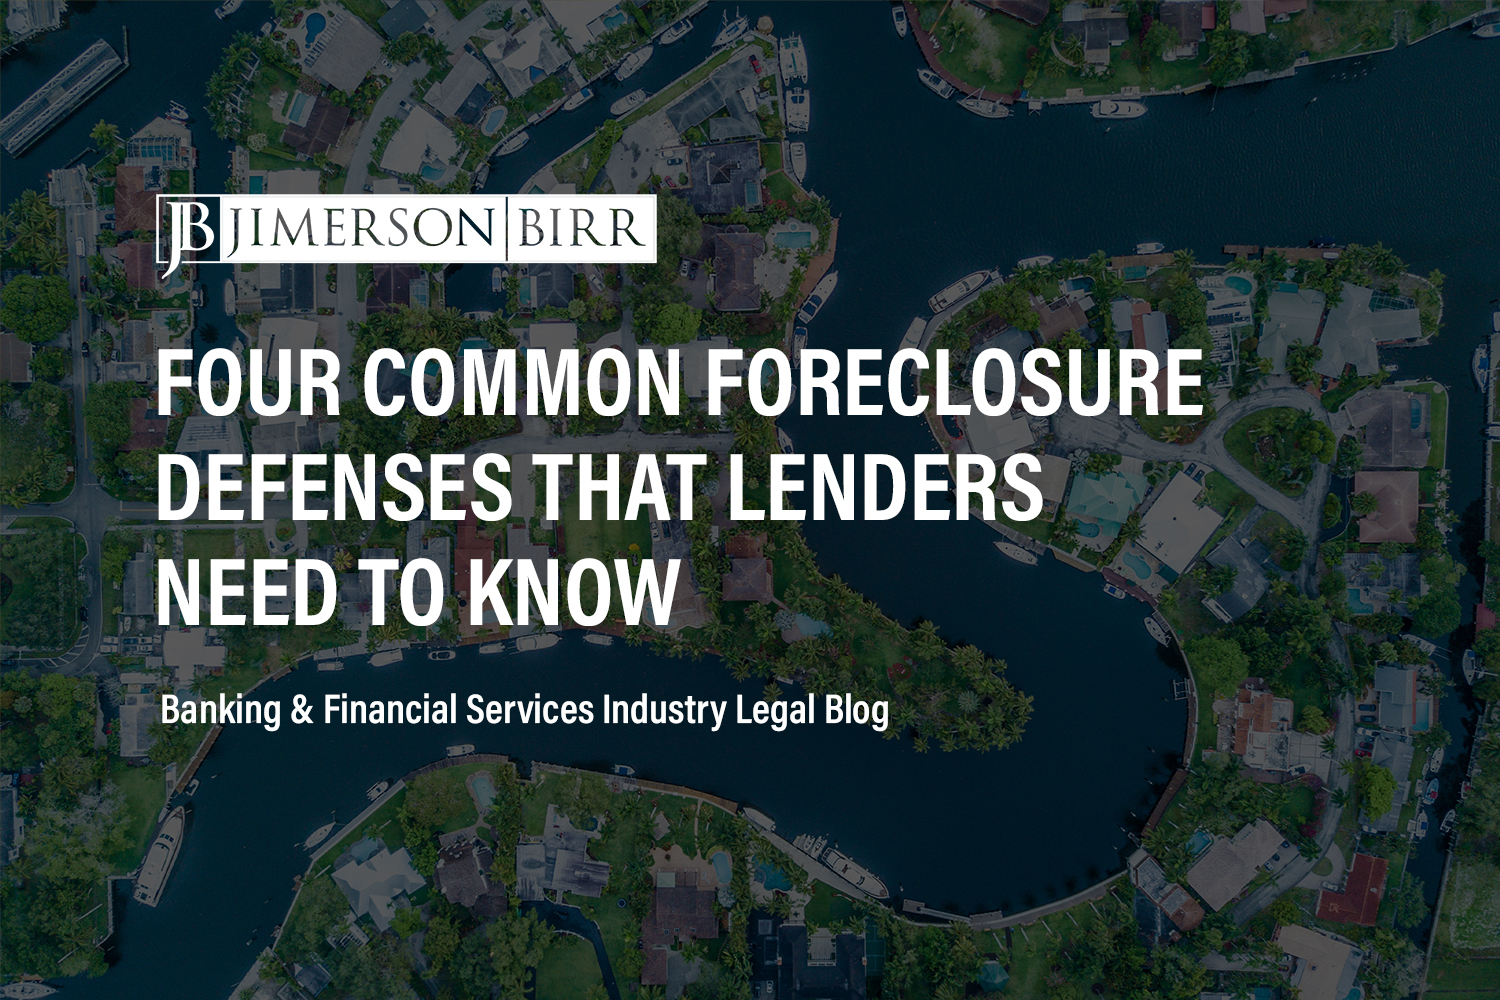 Four Common Foreclosure Defenses That Lenders Should Be Aware Of